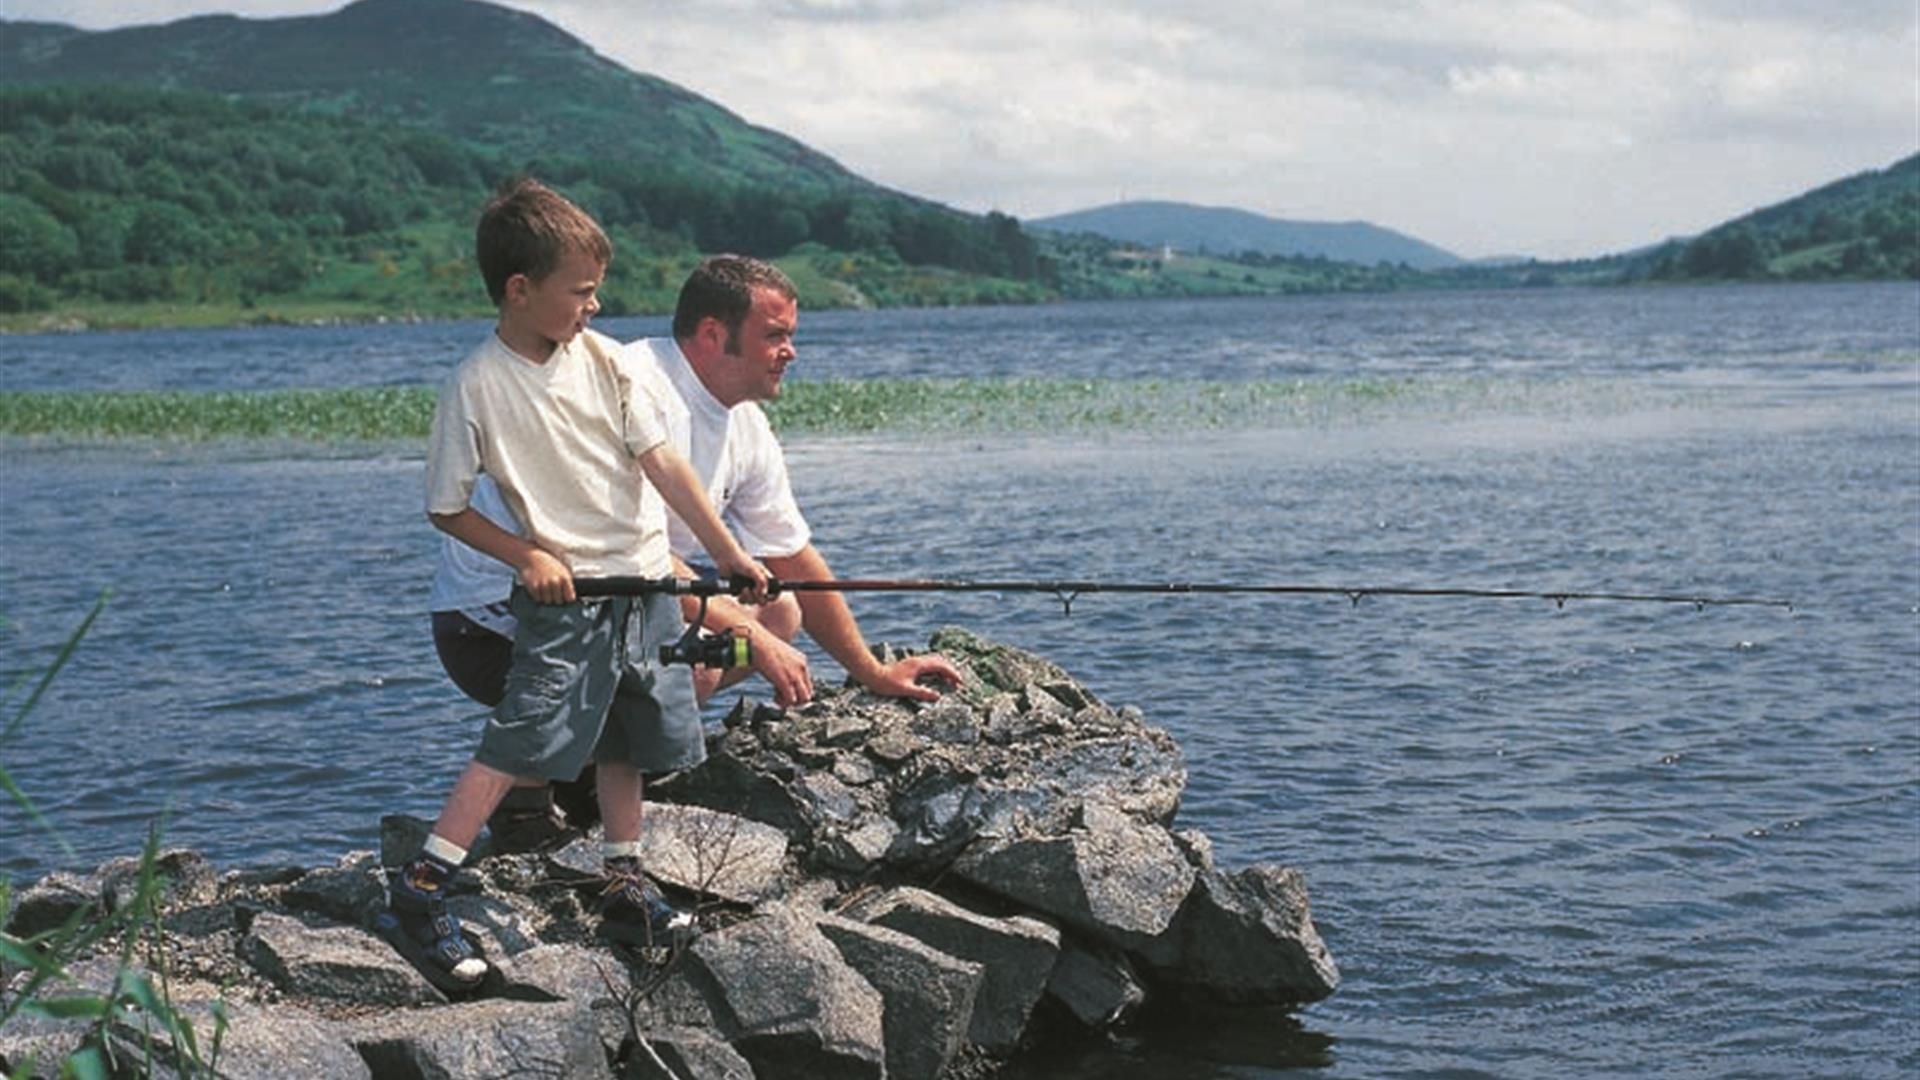 Father and Son fishing at Camlough Lake